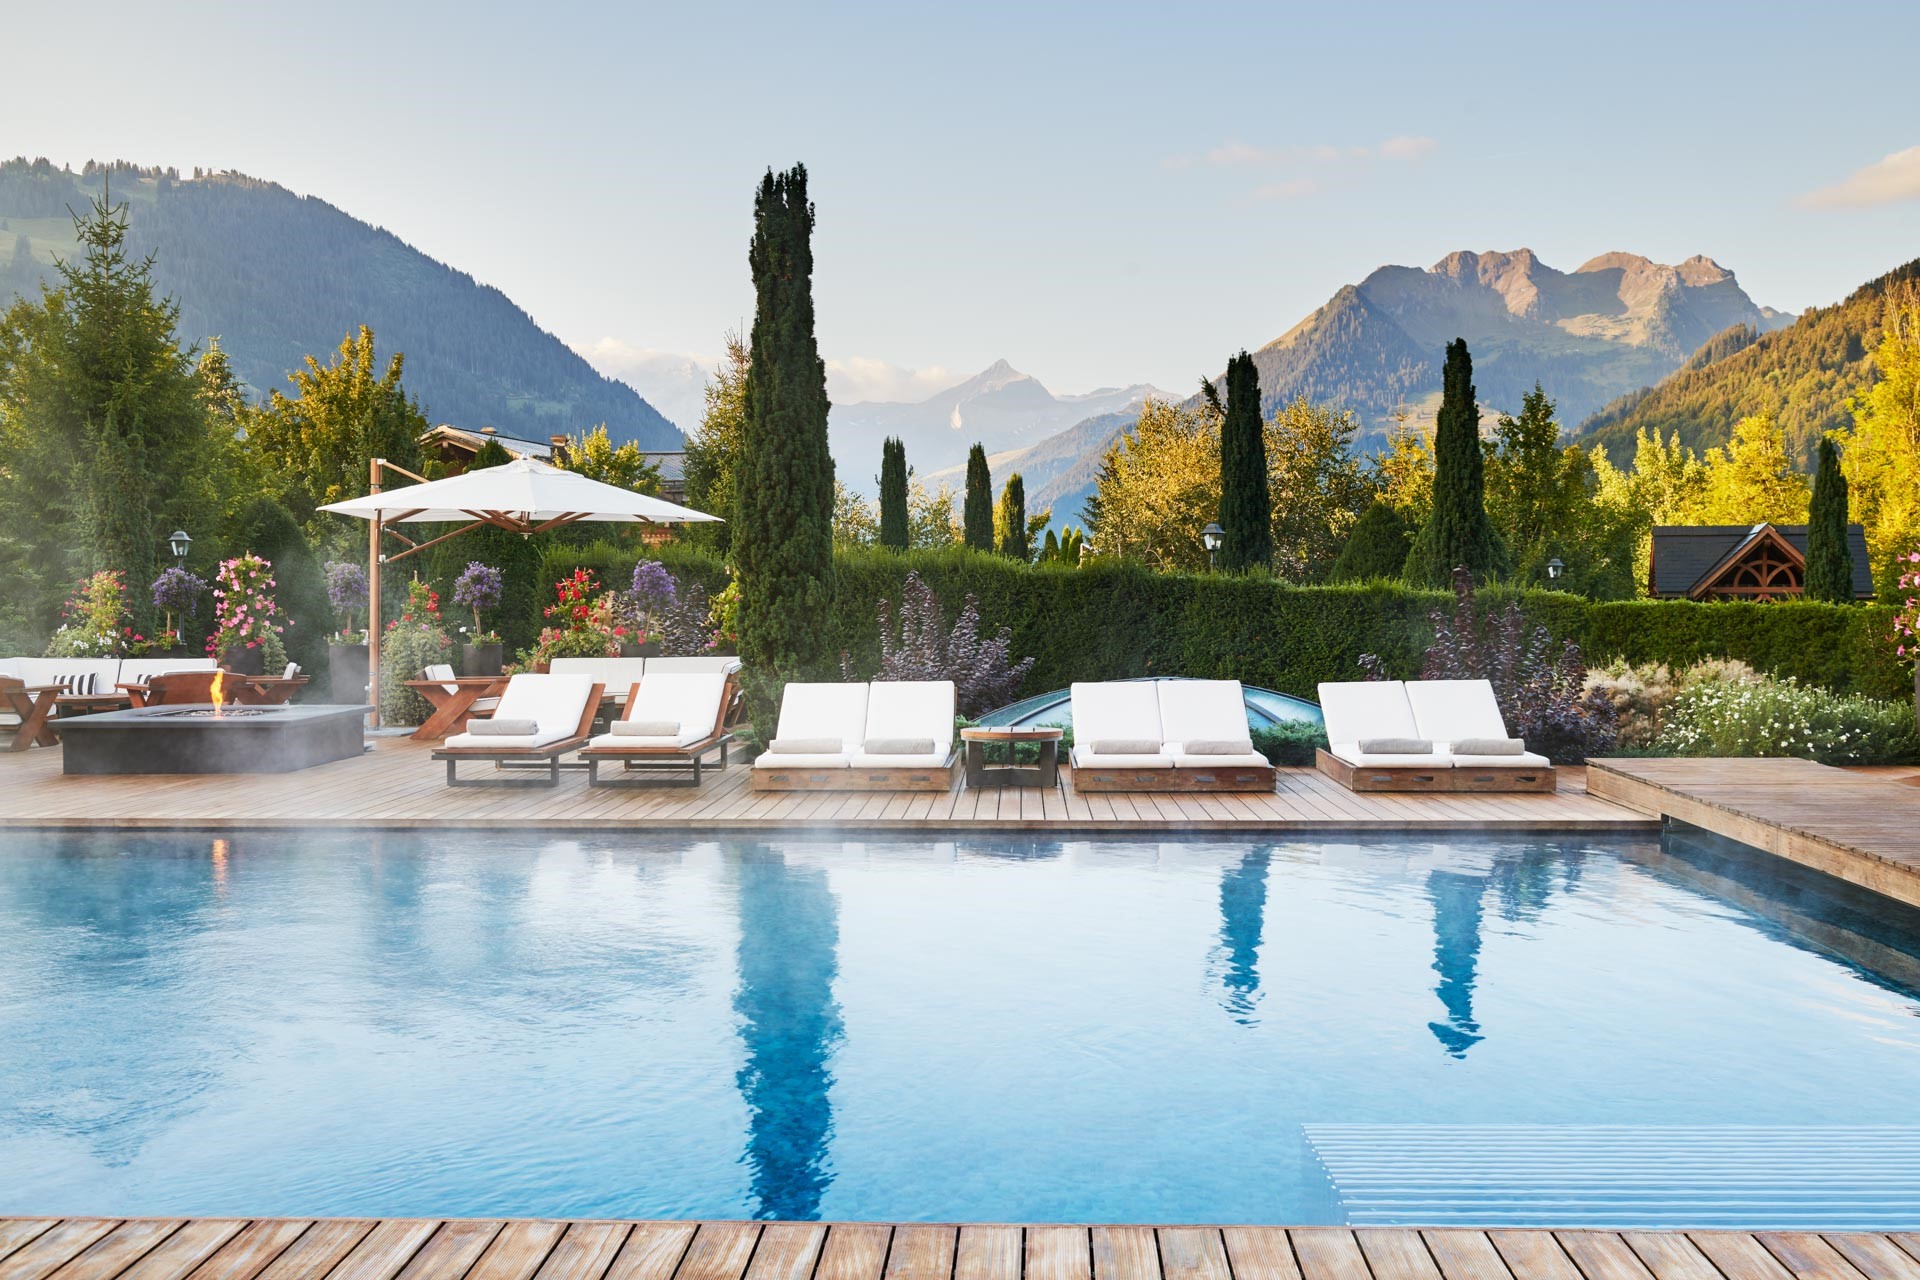 The hotel pool at the Alpina Gstaad